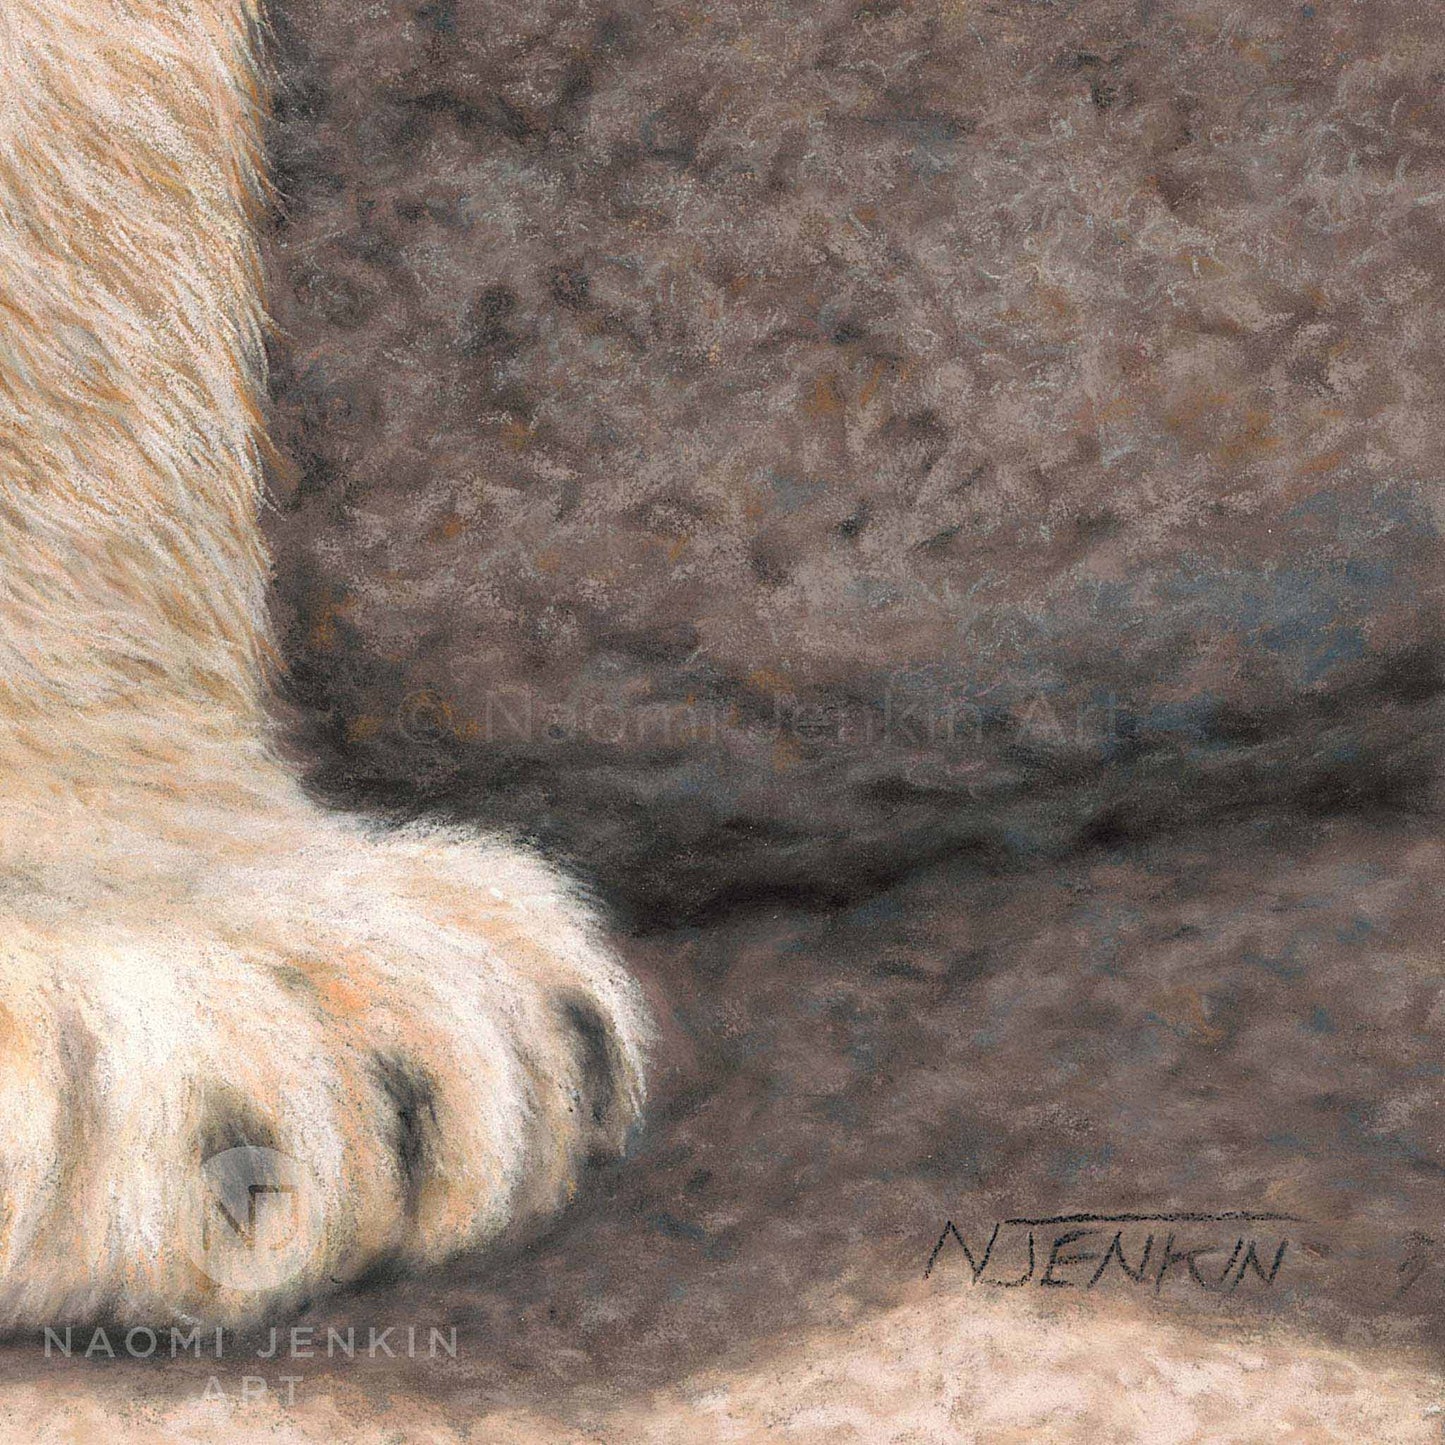 Close up lion cub foot from the 'Two Brothers' original painting by Naomi Jenkin